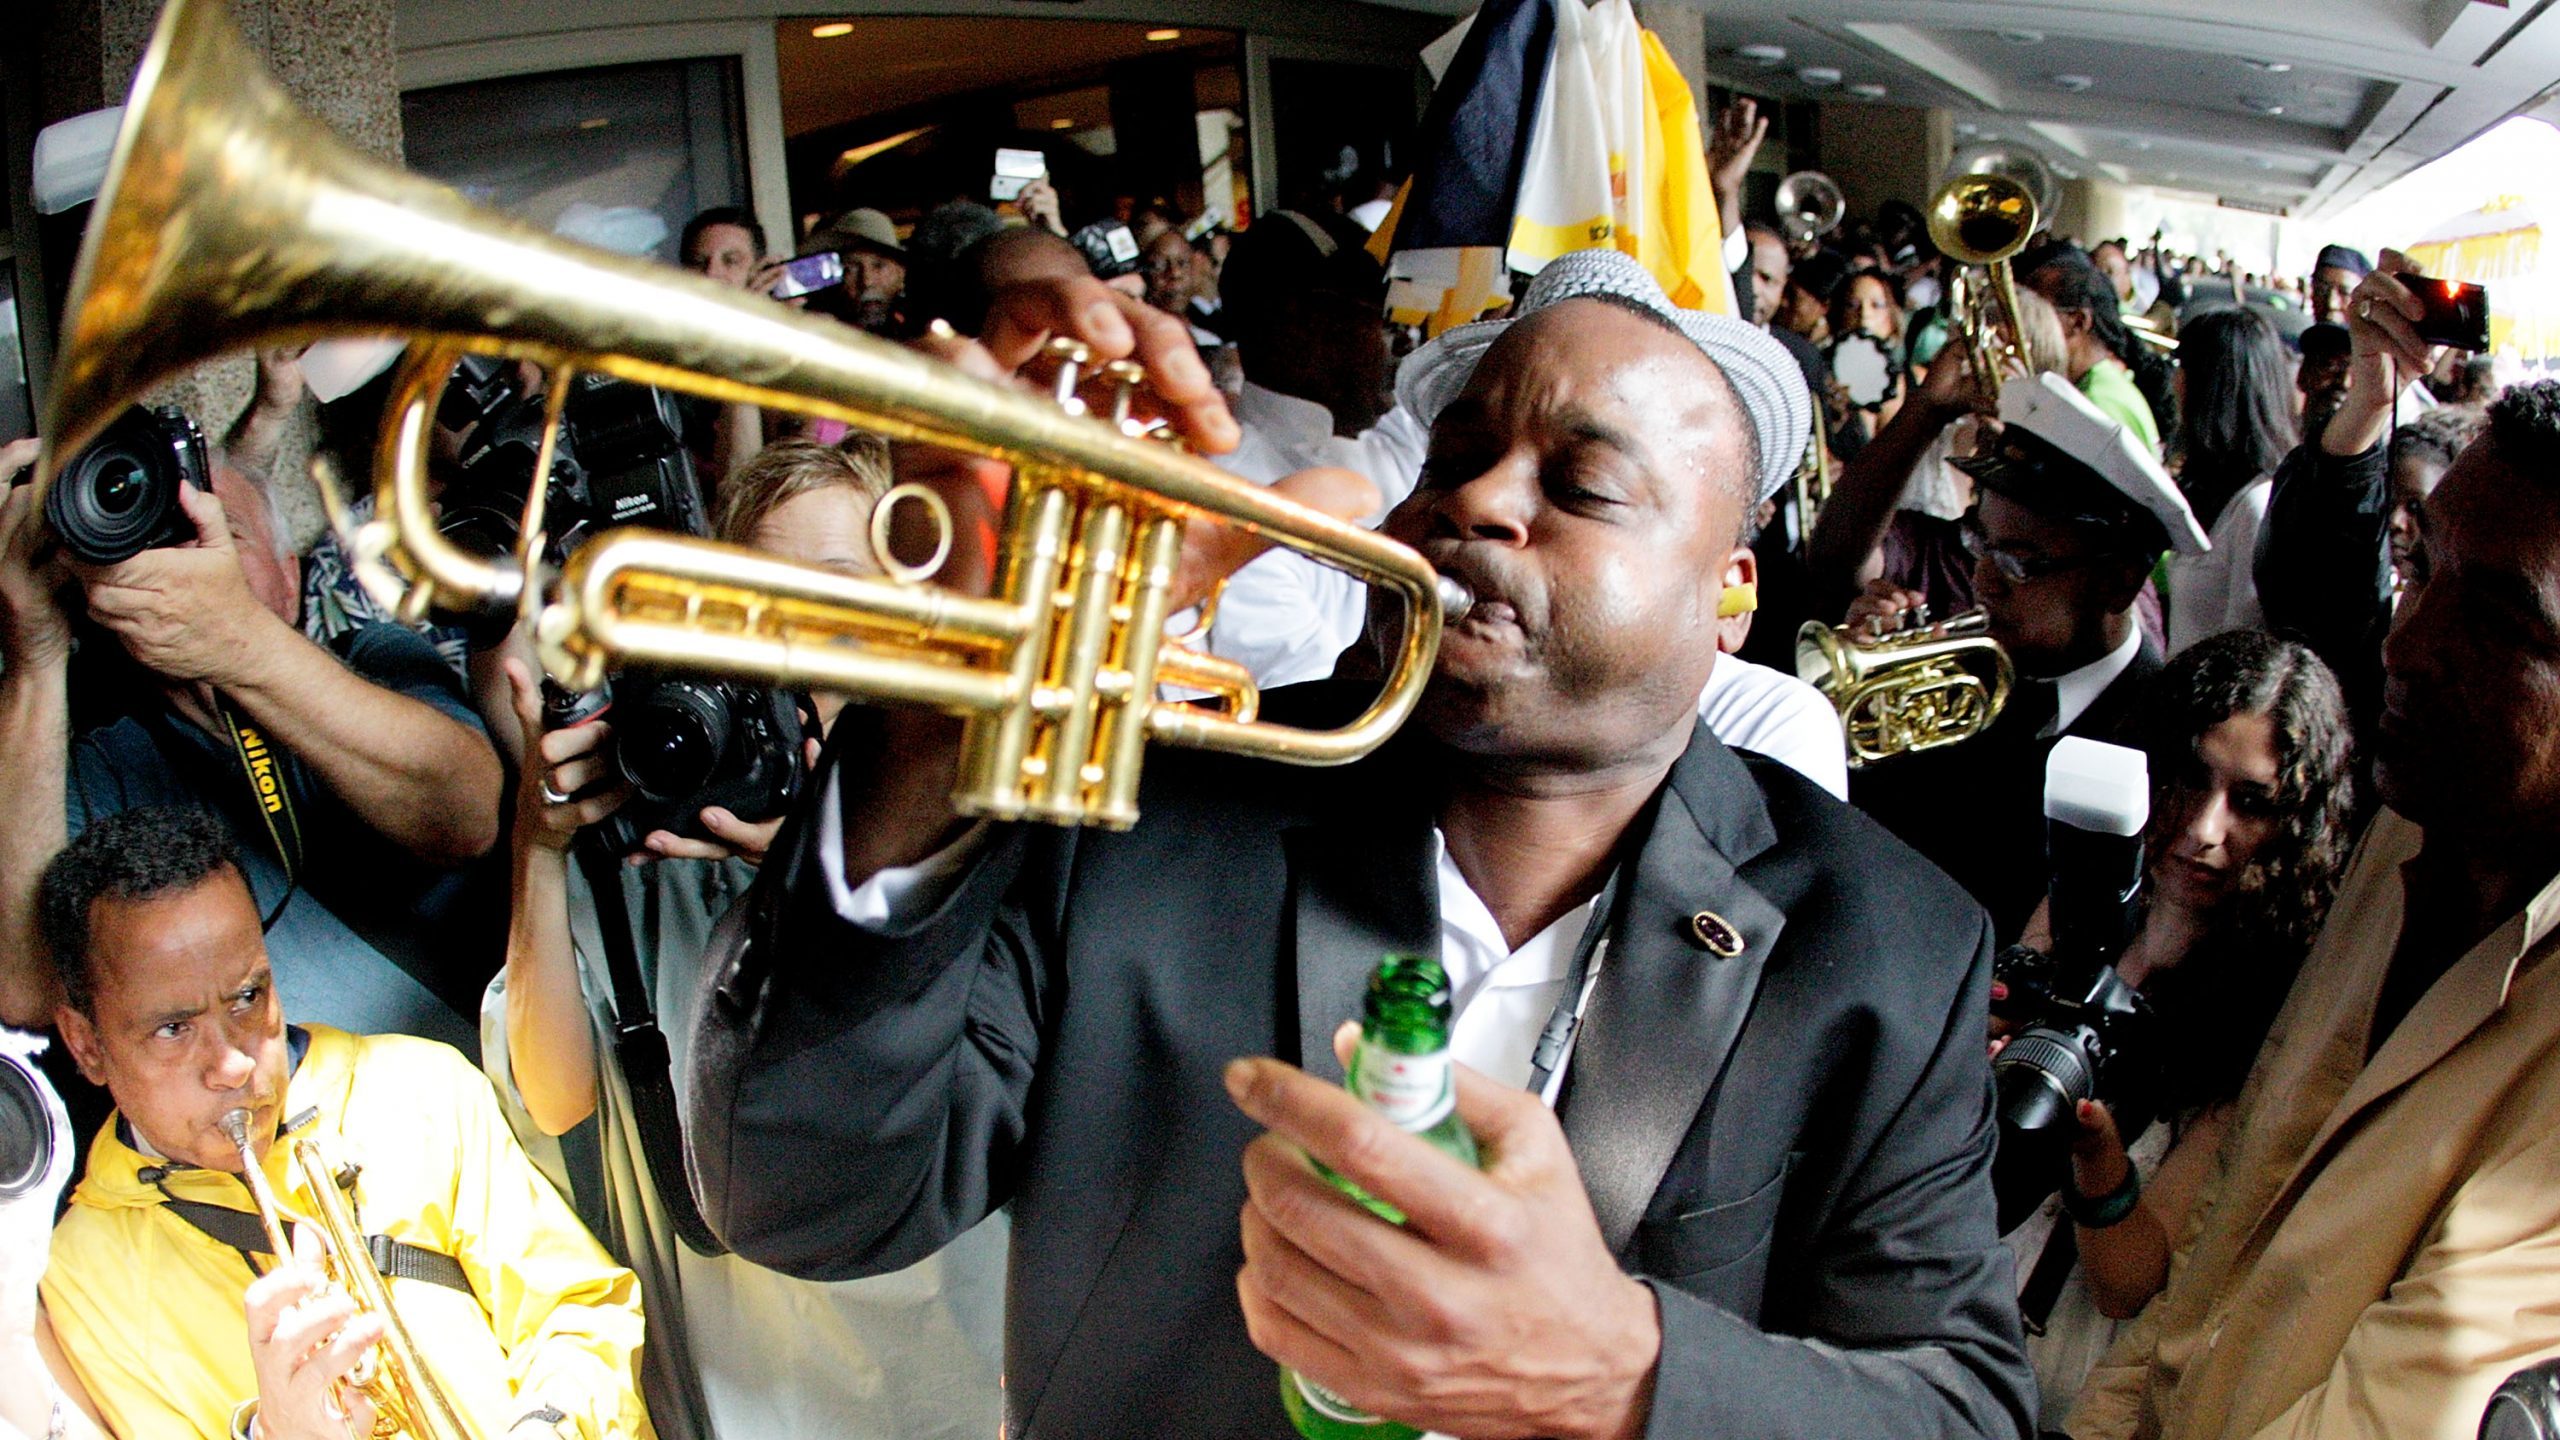 New Orleans traditional public jazz funerals called off ...